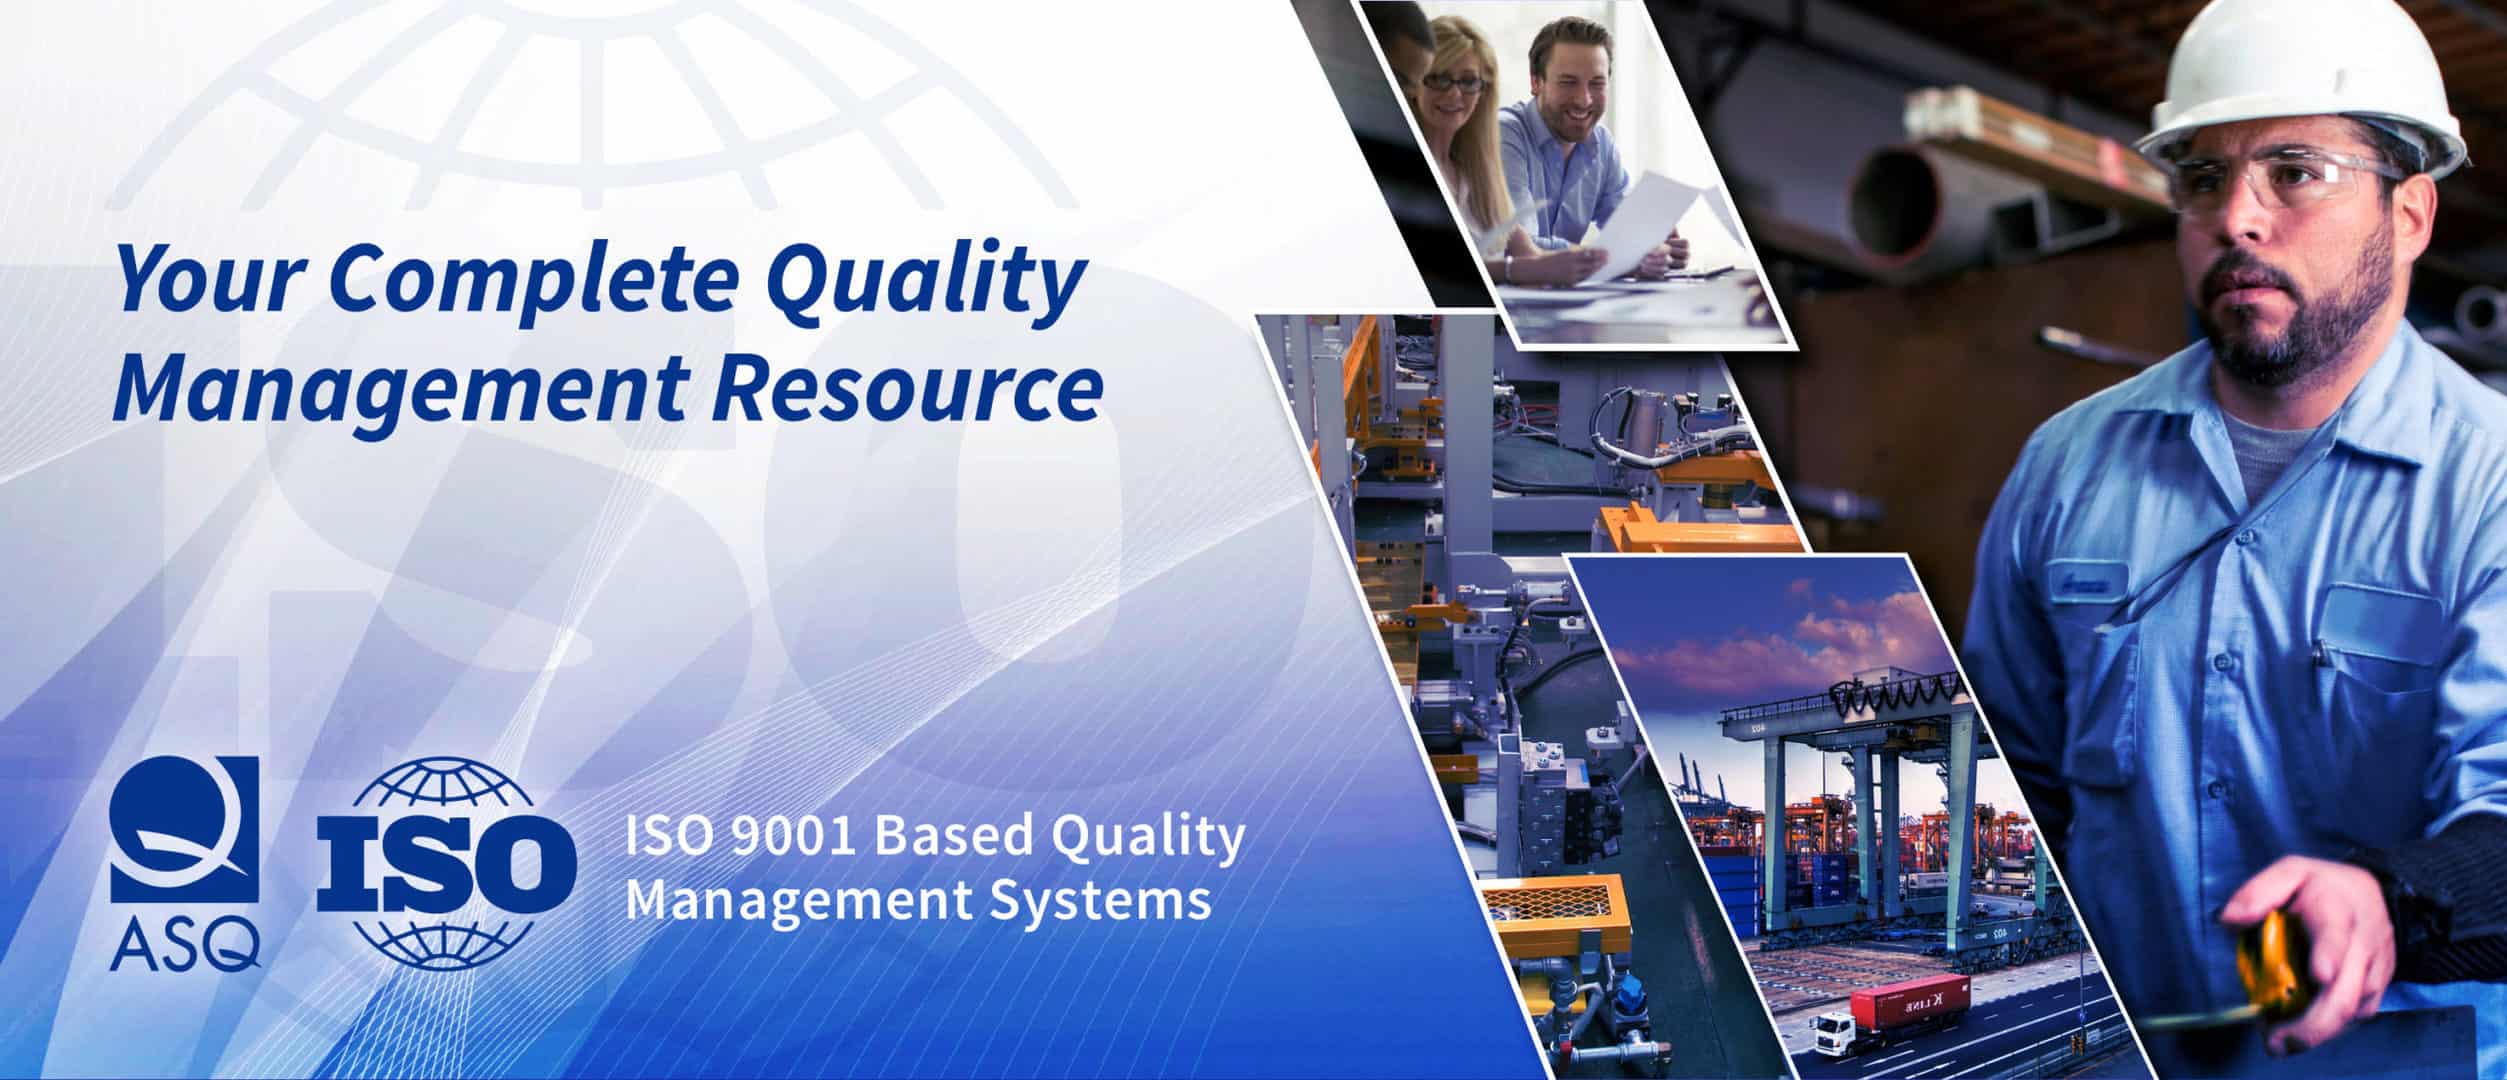 Quality Systems Associates - Quality Management Resource